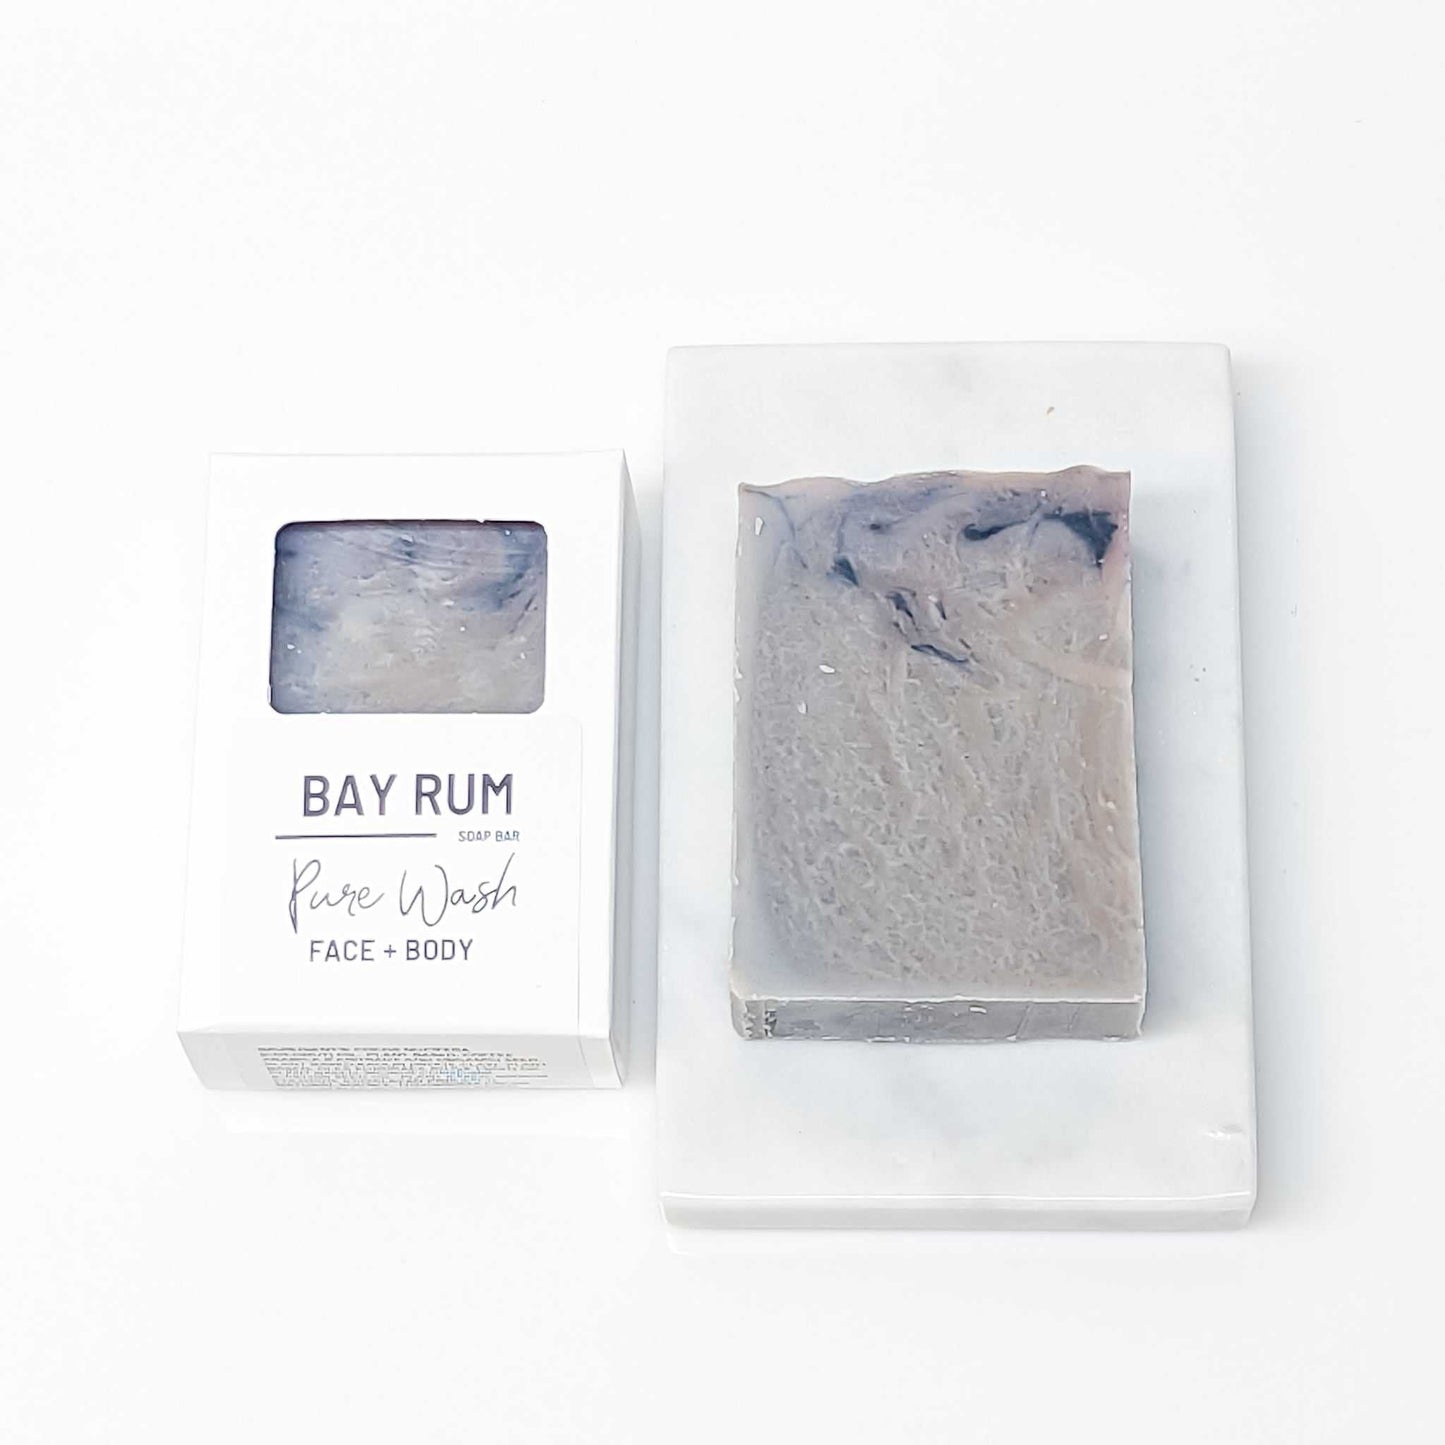 Natural Bay Rum soap bar from CG Pure Wash, signifying a refreshing and sustainable approach to bath essentials | CG Pure Wash